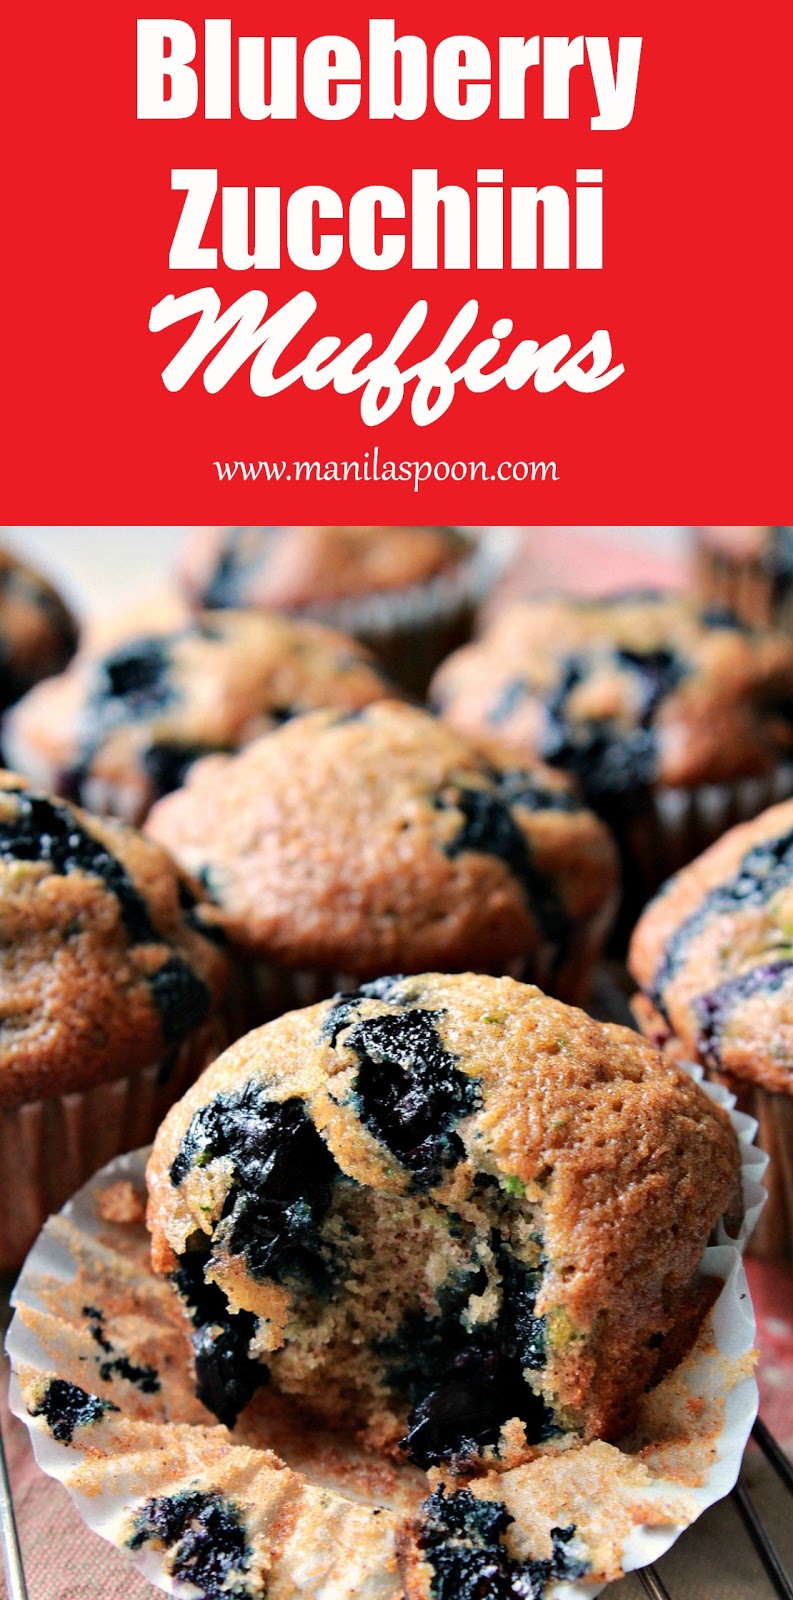 Bursting with flavor from juicy blueberries and loaded with zucchini too these moist and scrumptious muffins are perfectly wholesome and great as snack or breakfast for the whole family!